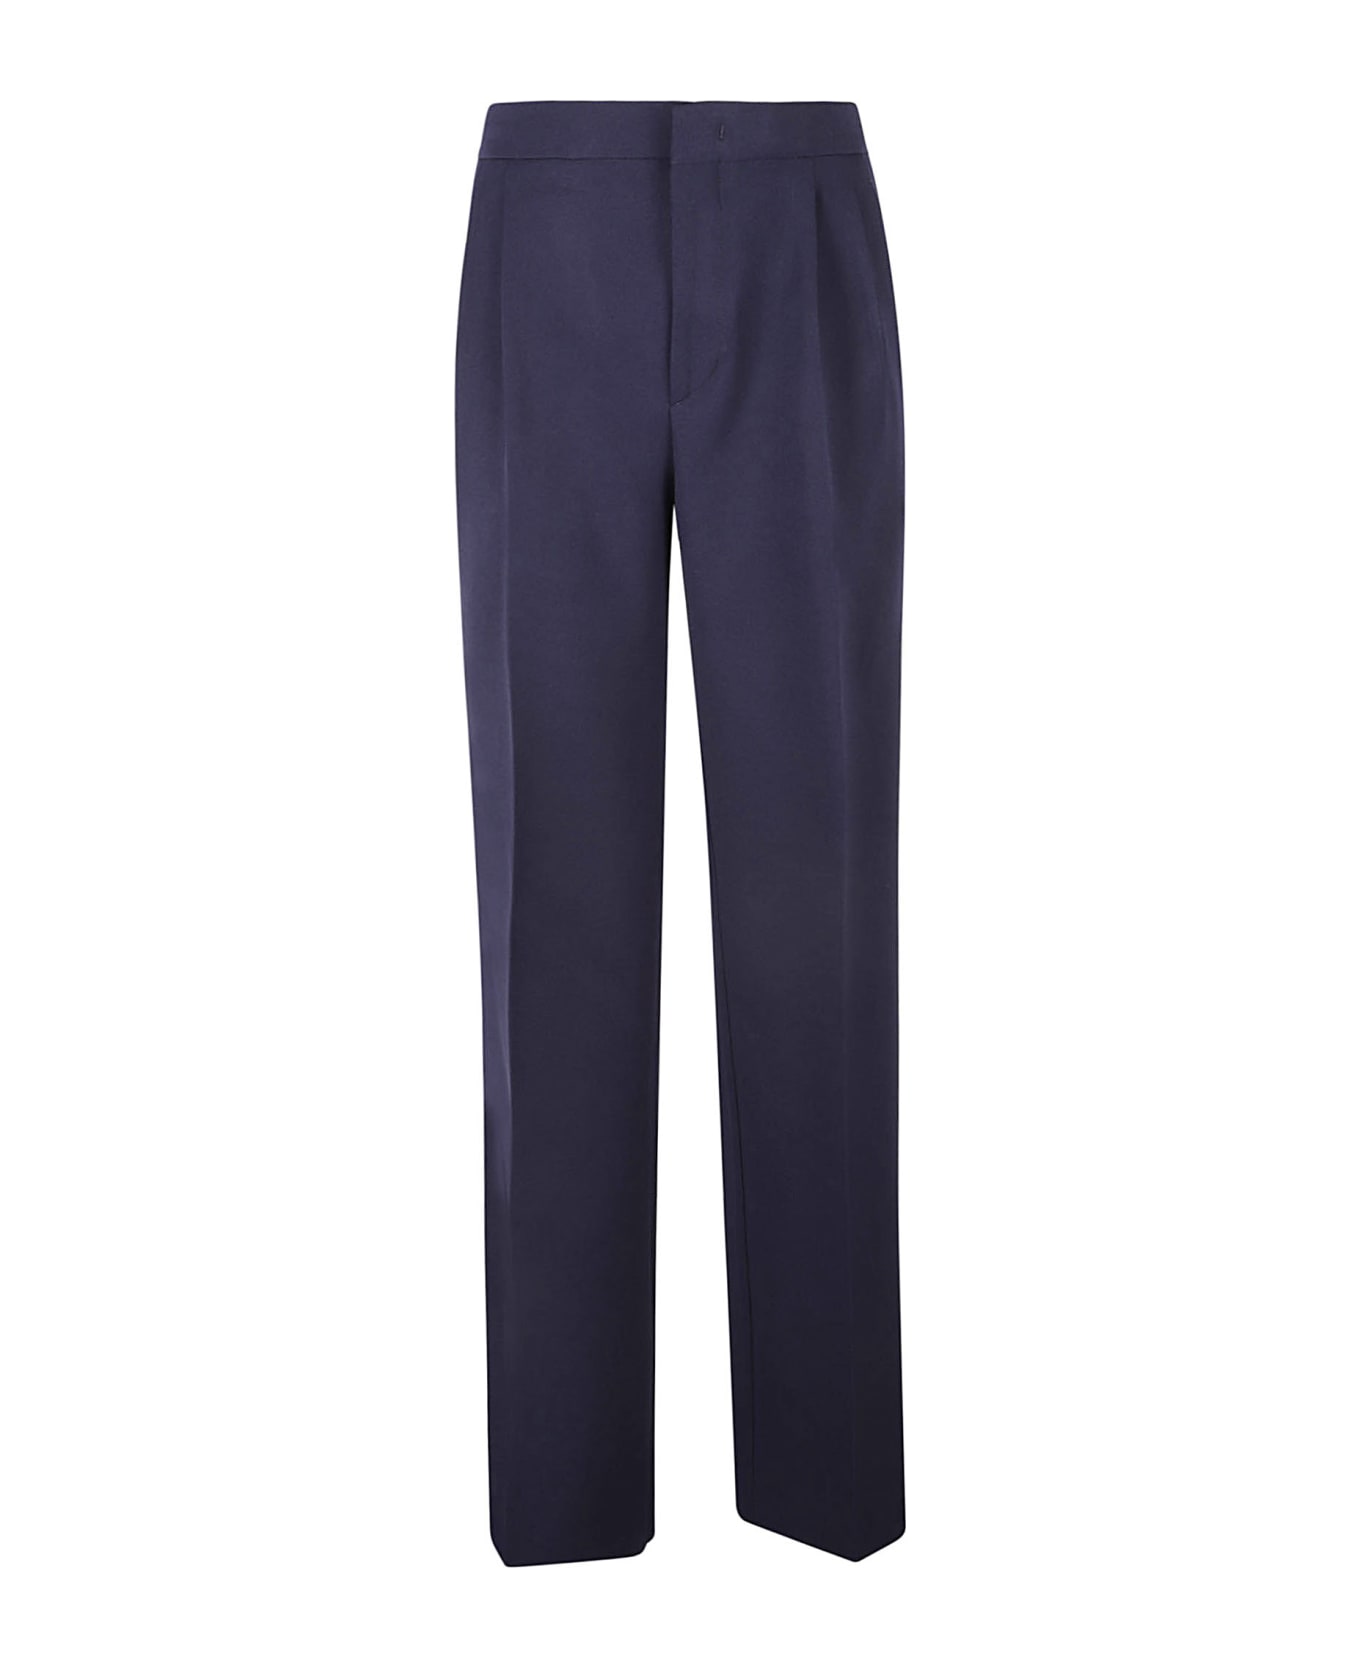 Tagliatore Concealed Trousers - Blue